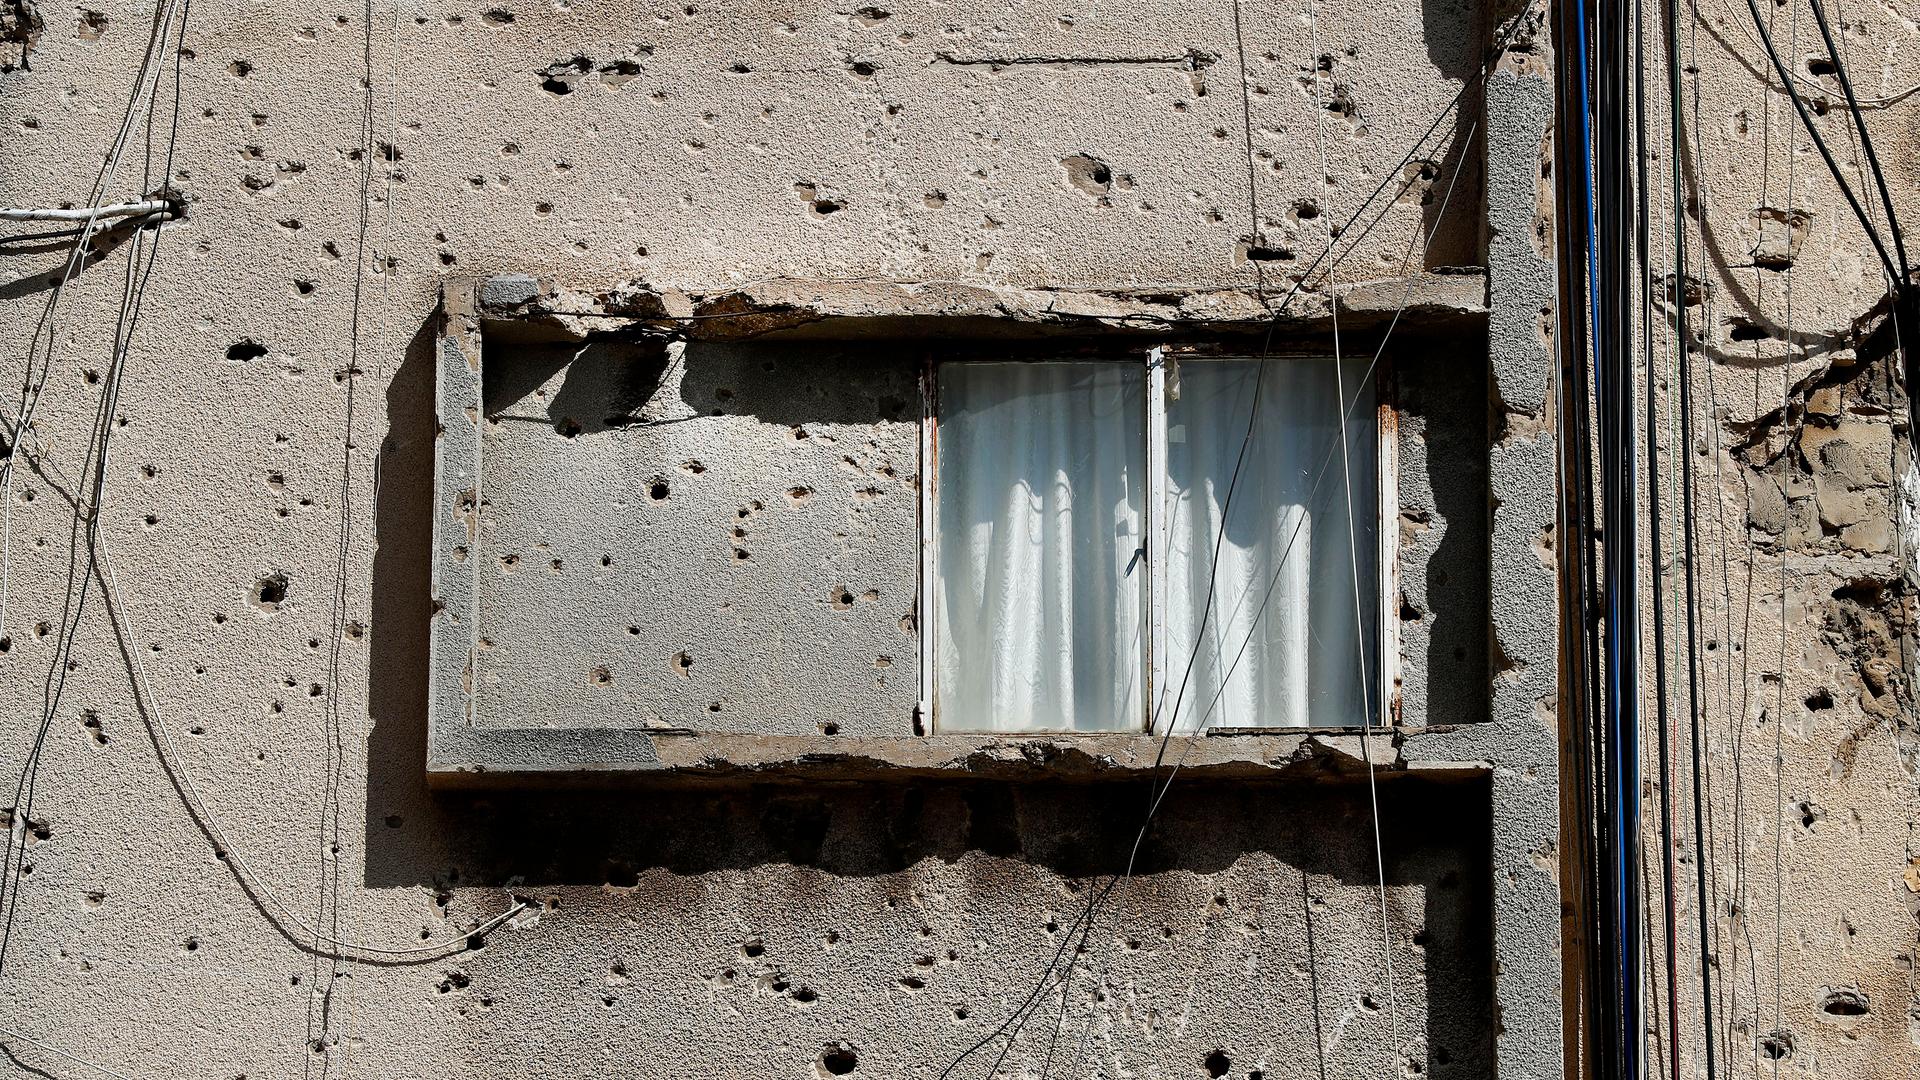 A building is still riddled with war damage, on the former frontline of the Lebanese Civil War, in Beirut, Lebanon, Tuesday, April 13, 2021.